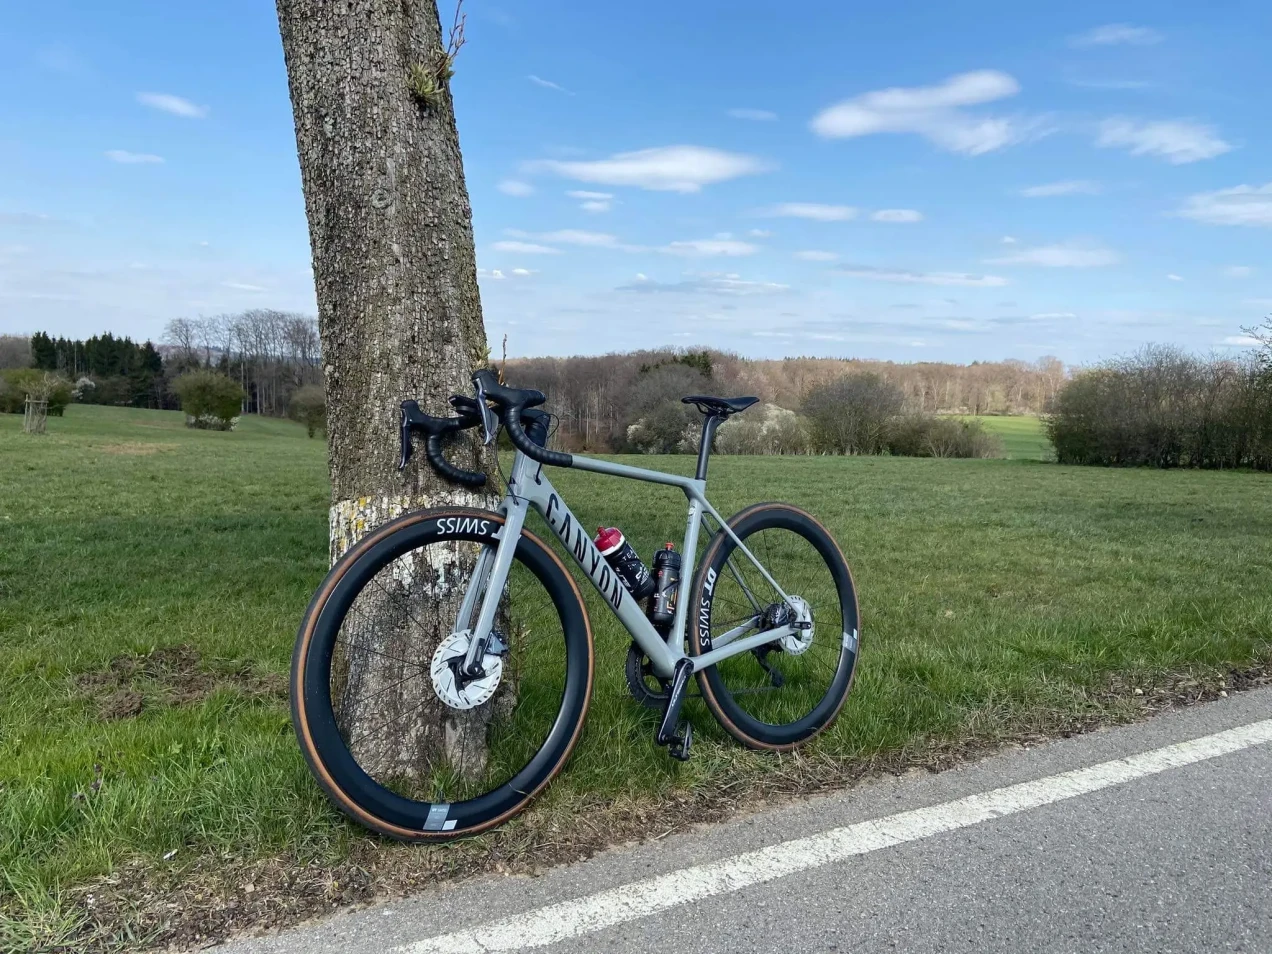 Canyon Ultimate CF SL 8 Disc Aero used in SM | buycycle